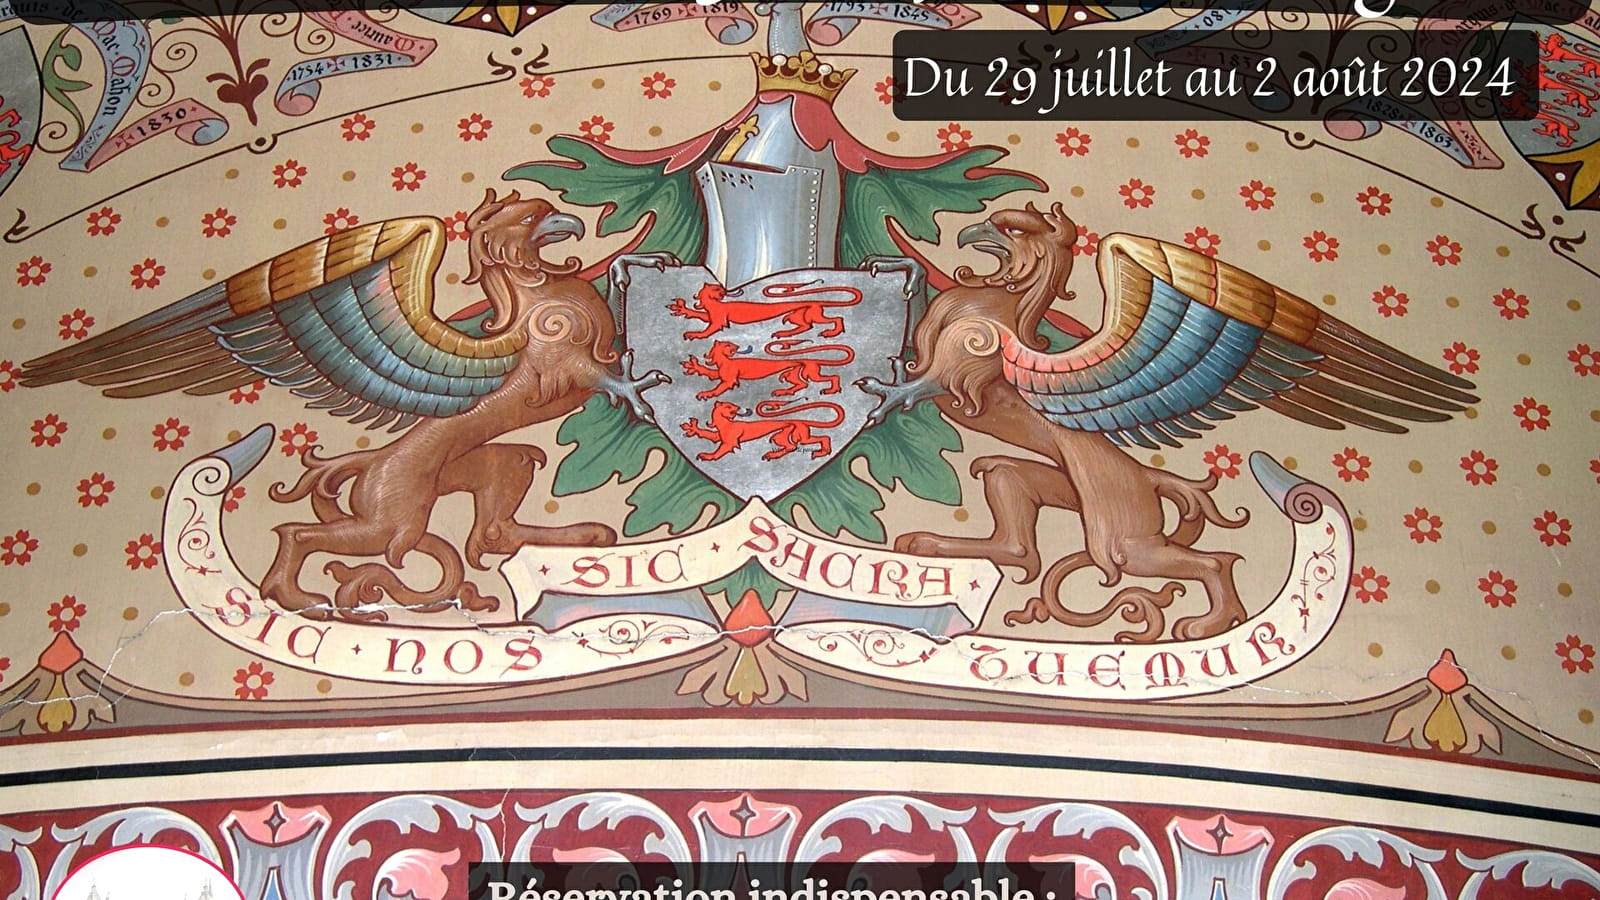 The Sully coat of arms: explore and imagine!